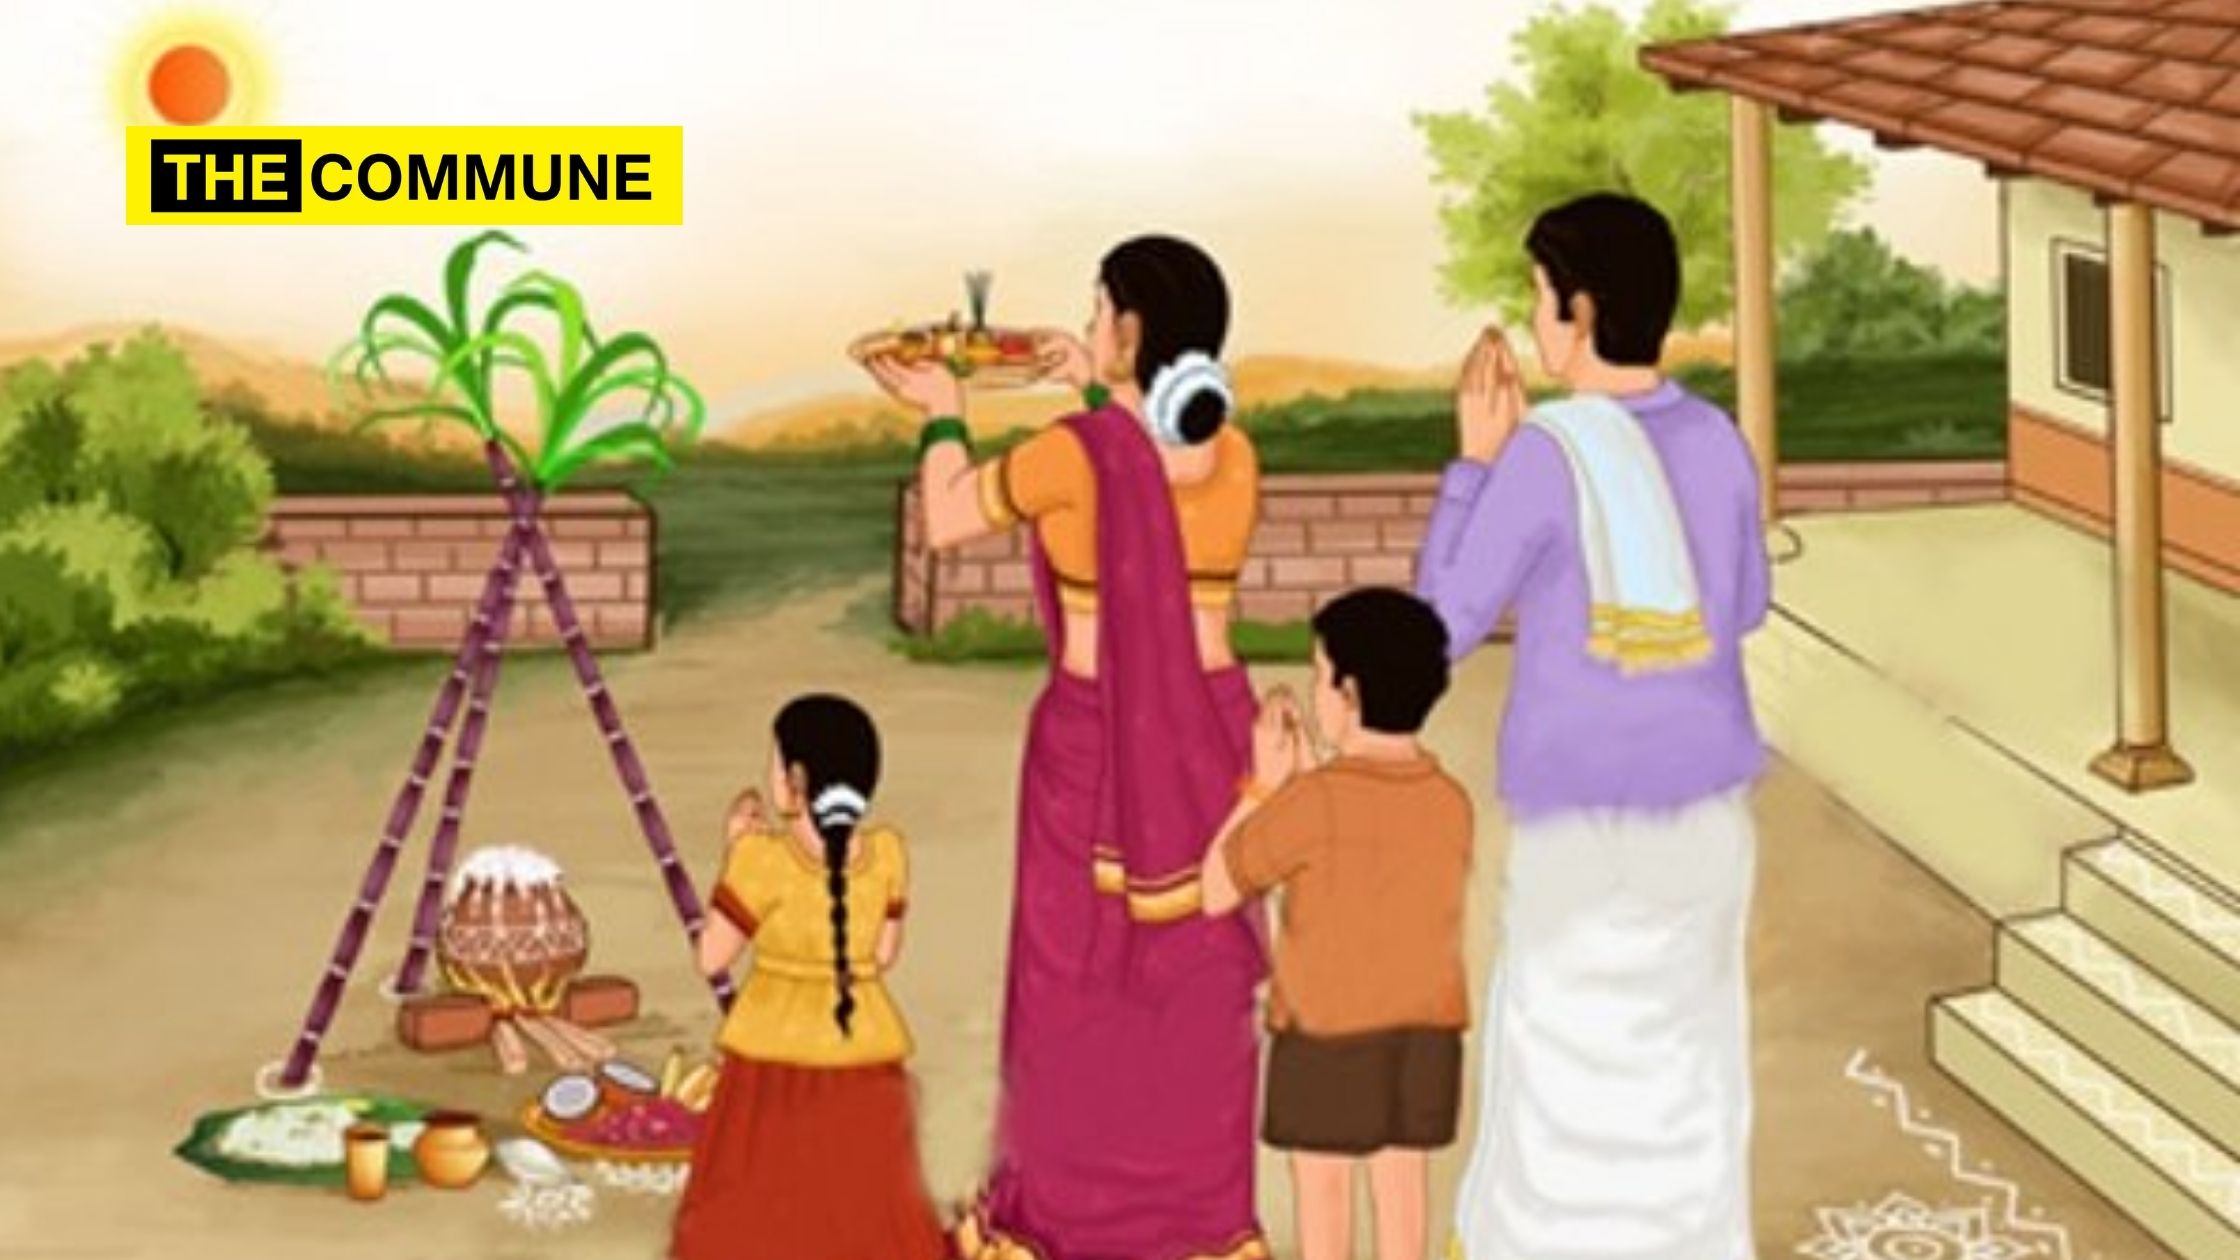 Pongal is a Hindu festival, not a 'minority appeasing secular' festival -  The Commune